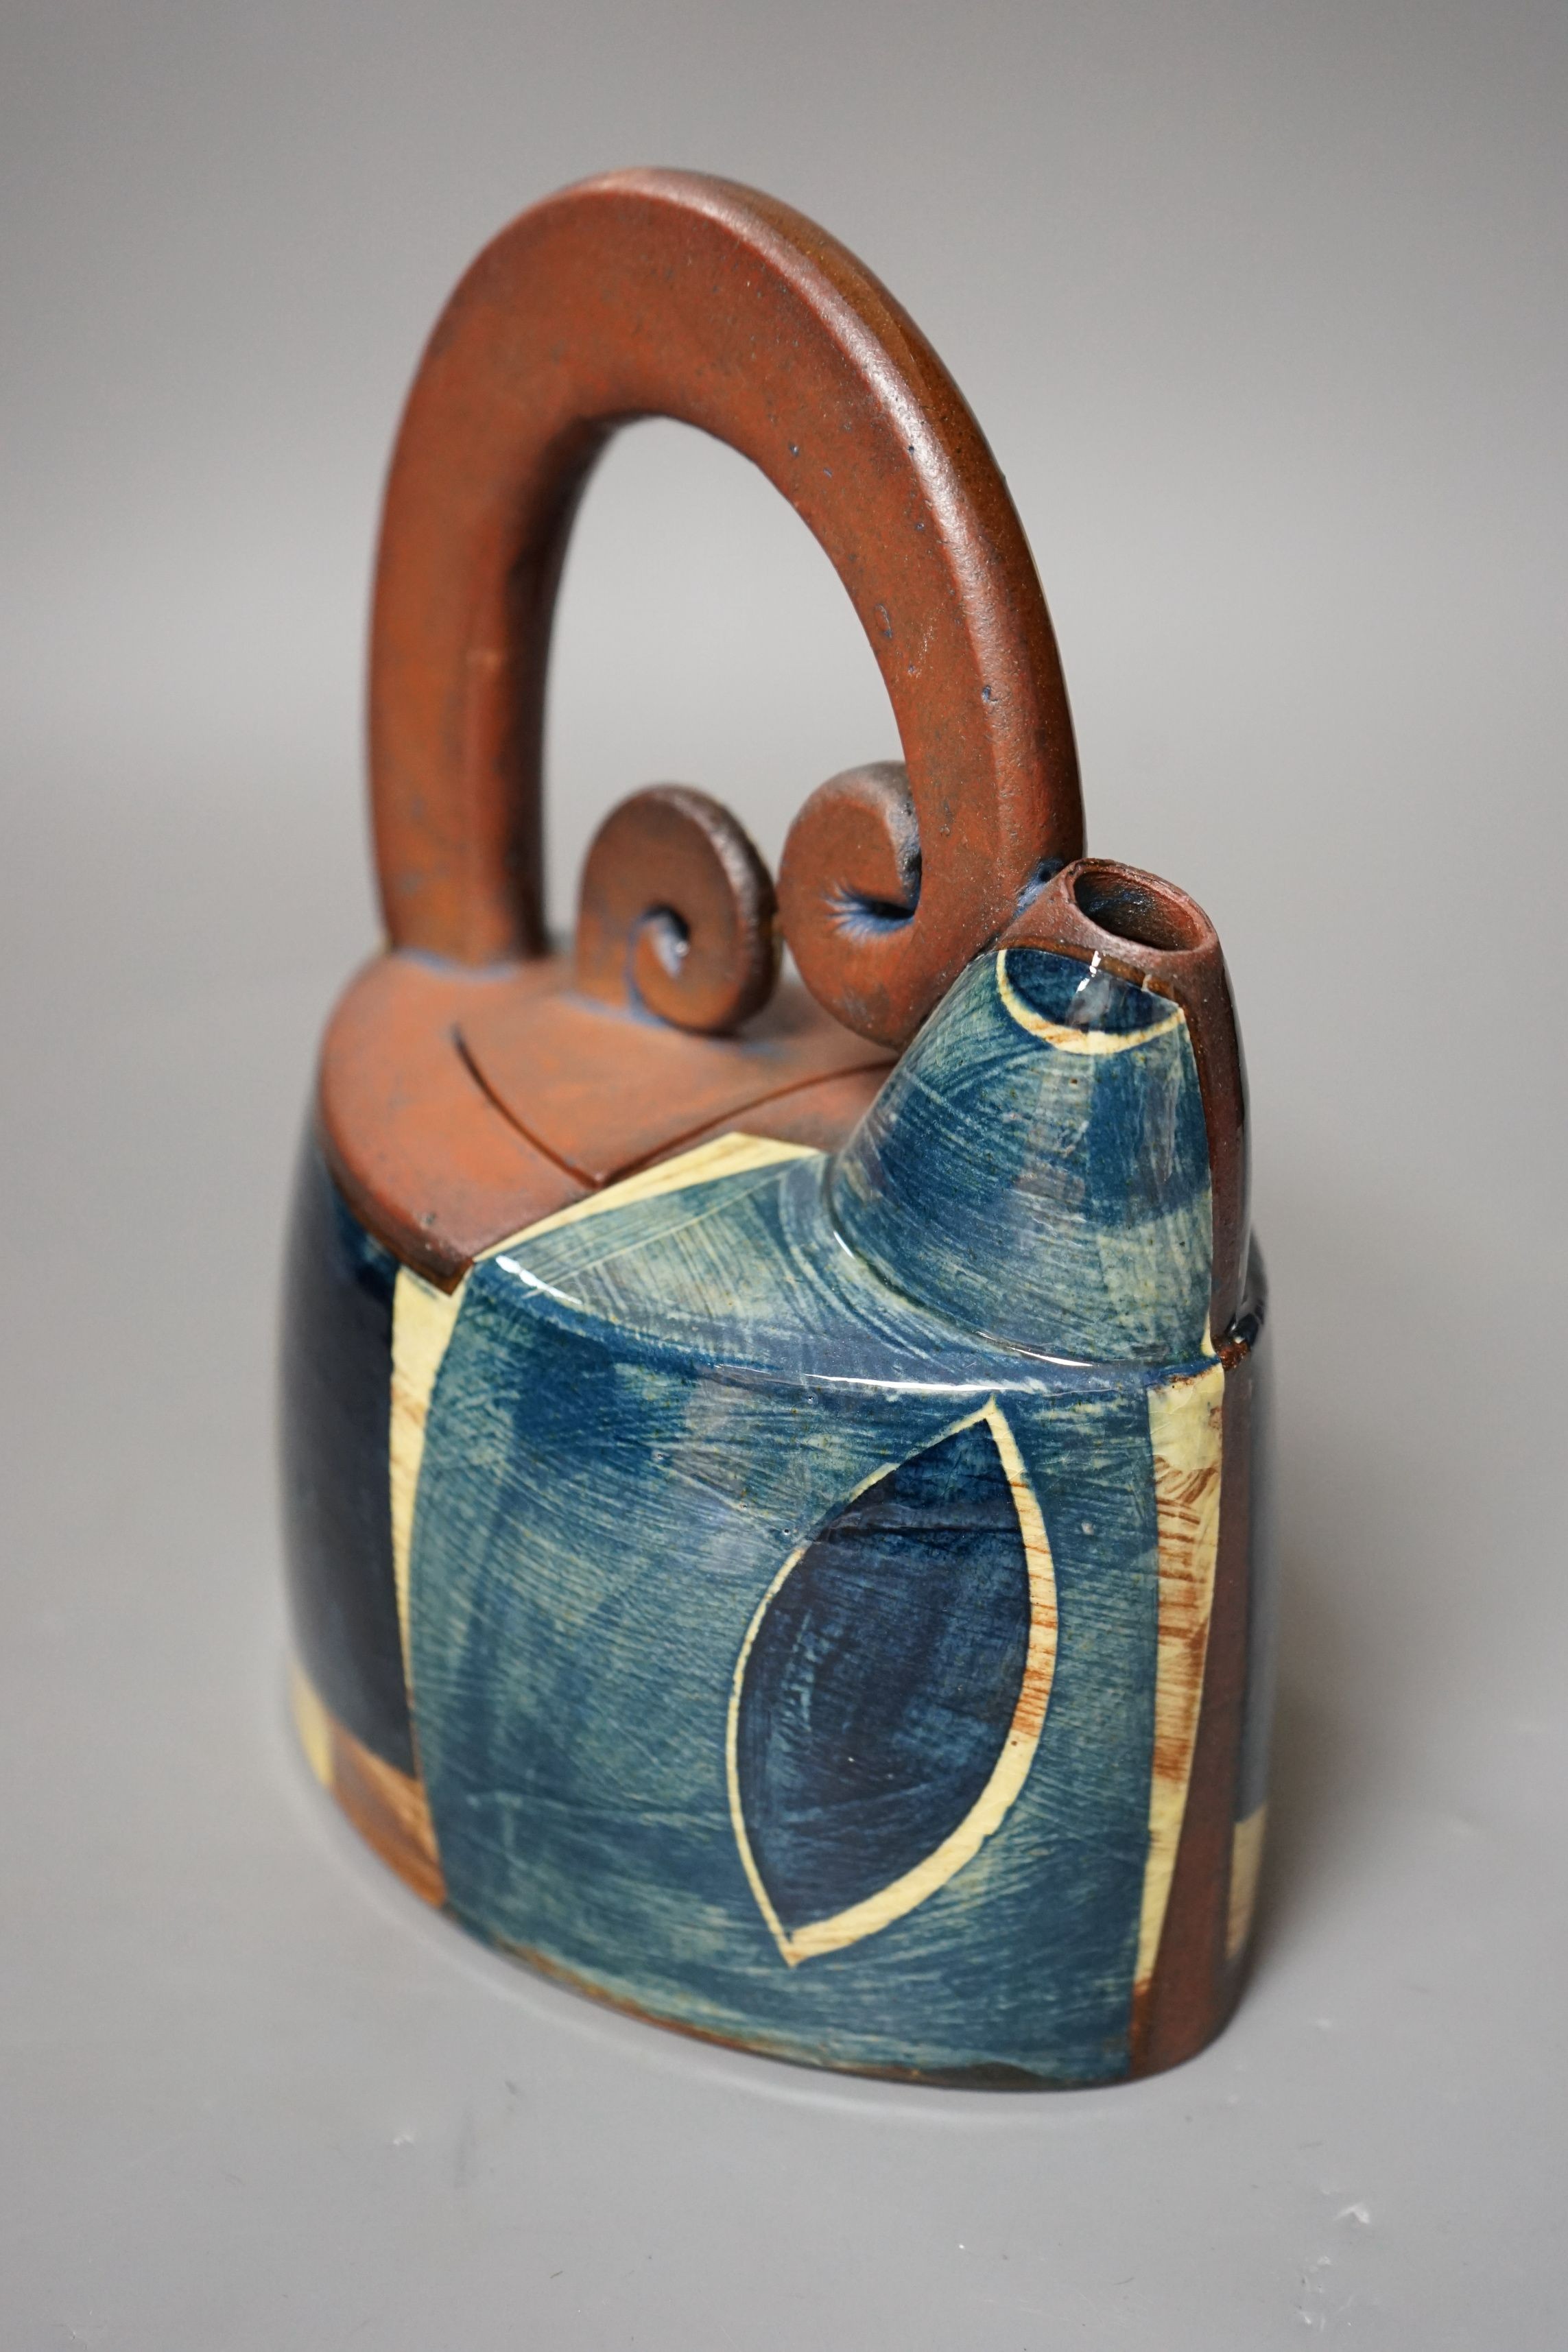 Richard Phethean (b.1953), an abstract green yellow and blue glazed earthenware teapot, purchased from Craft Potters Association contemporary ceramics centre, 63 Great Russell Street, London, 23cm tall